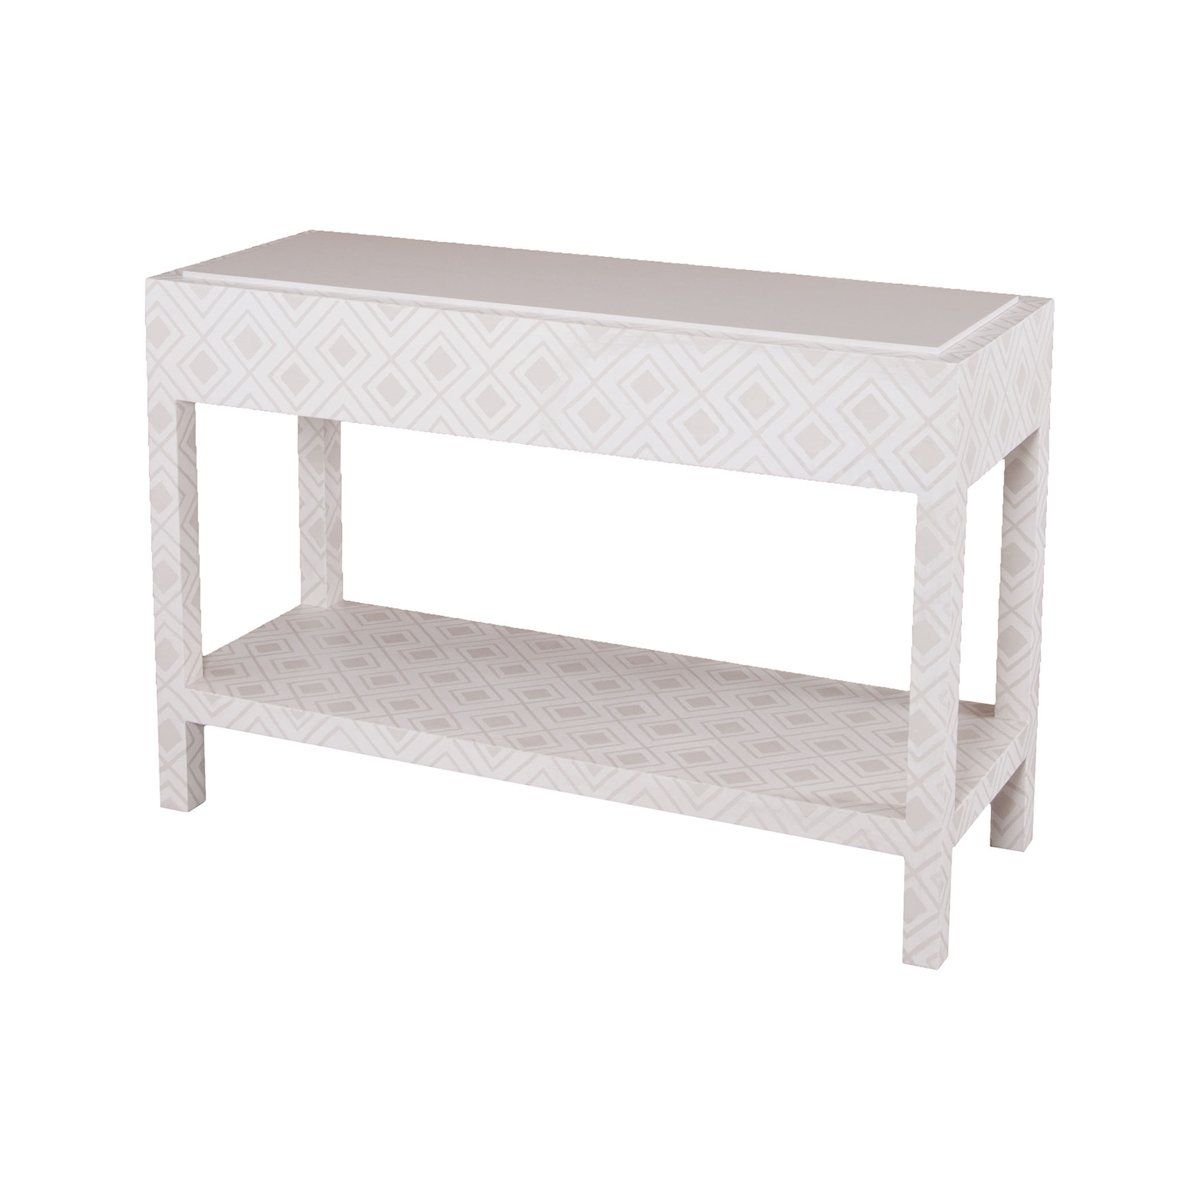 Kent Fabric Wrapped Console | Products In 2018 | Pinterest For Parsons White Marble Top &amp; Stainless Steel Base 48x16 Console Tables (View 21 of 30)